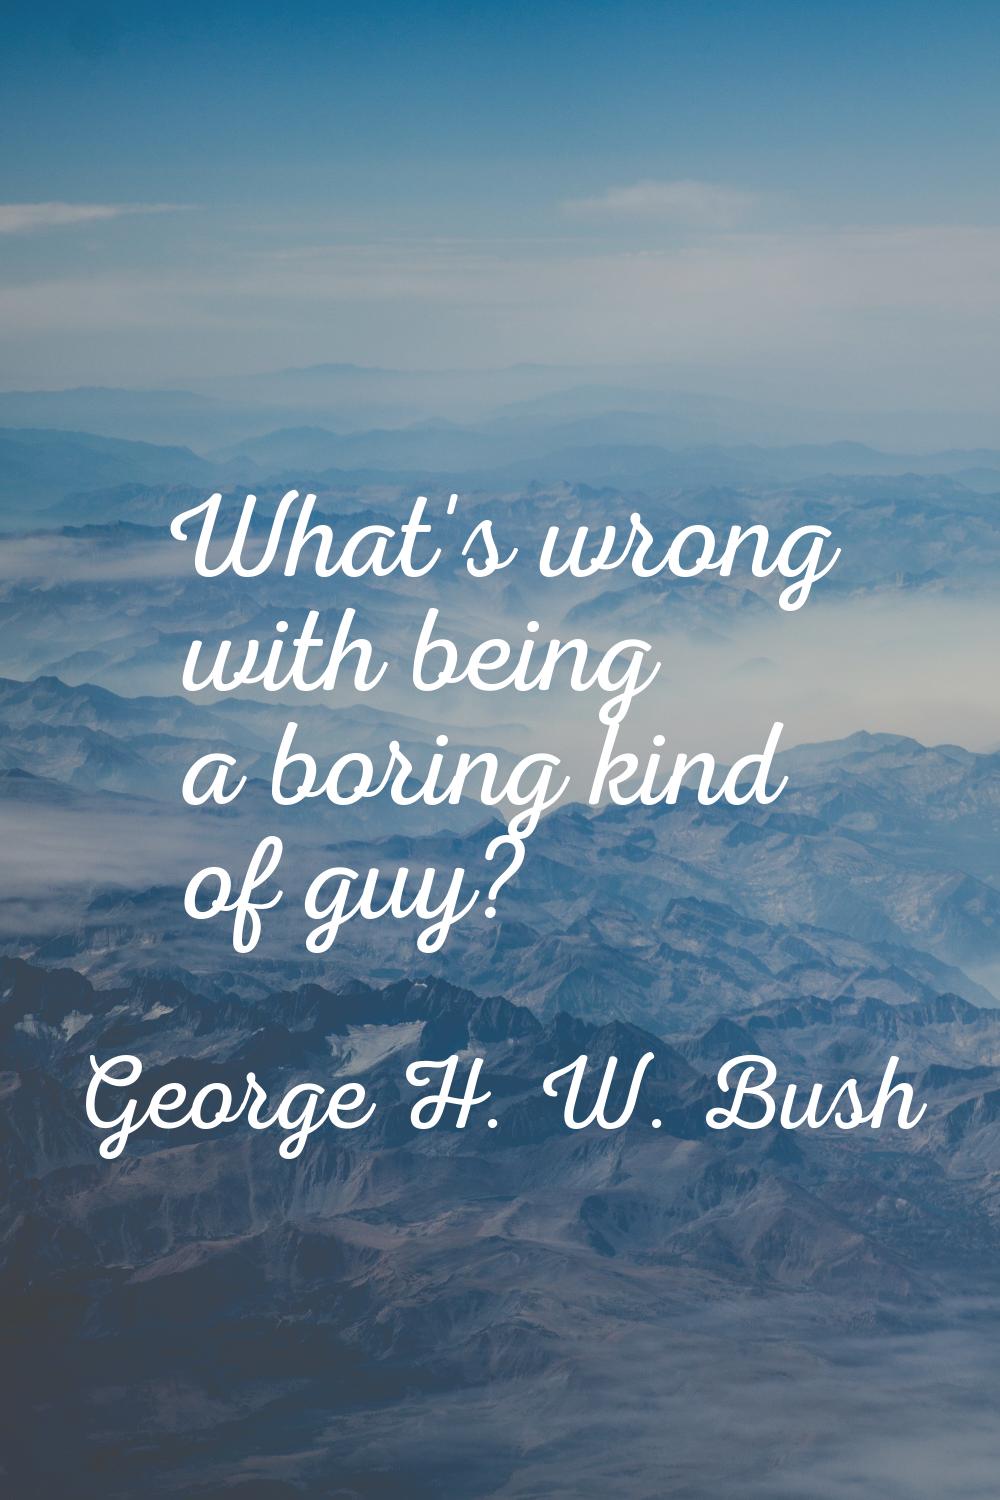 What's wrong with being a boring kind of guy?